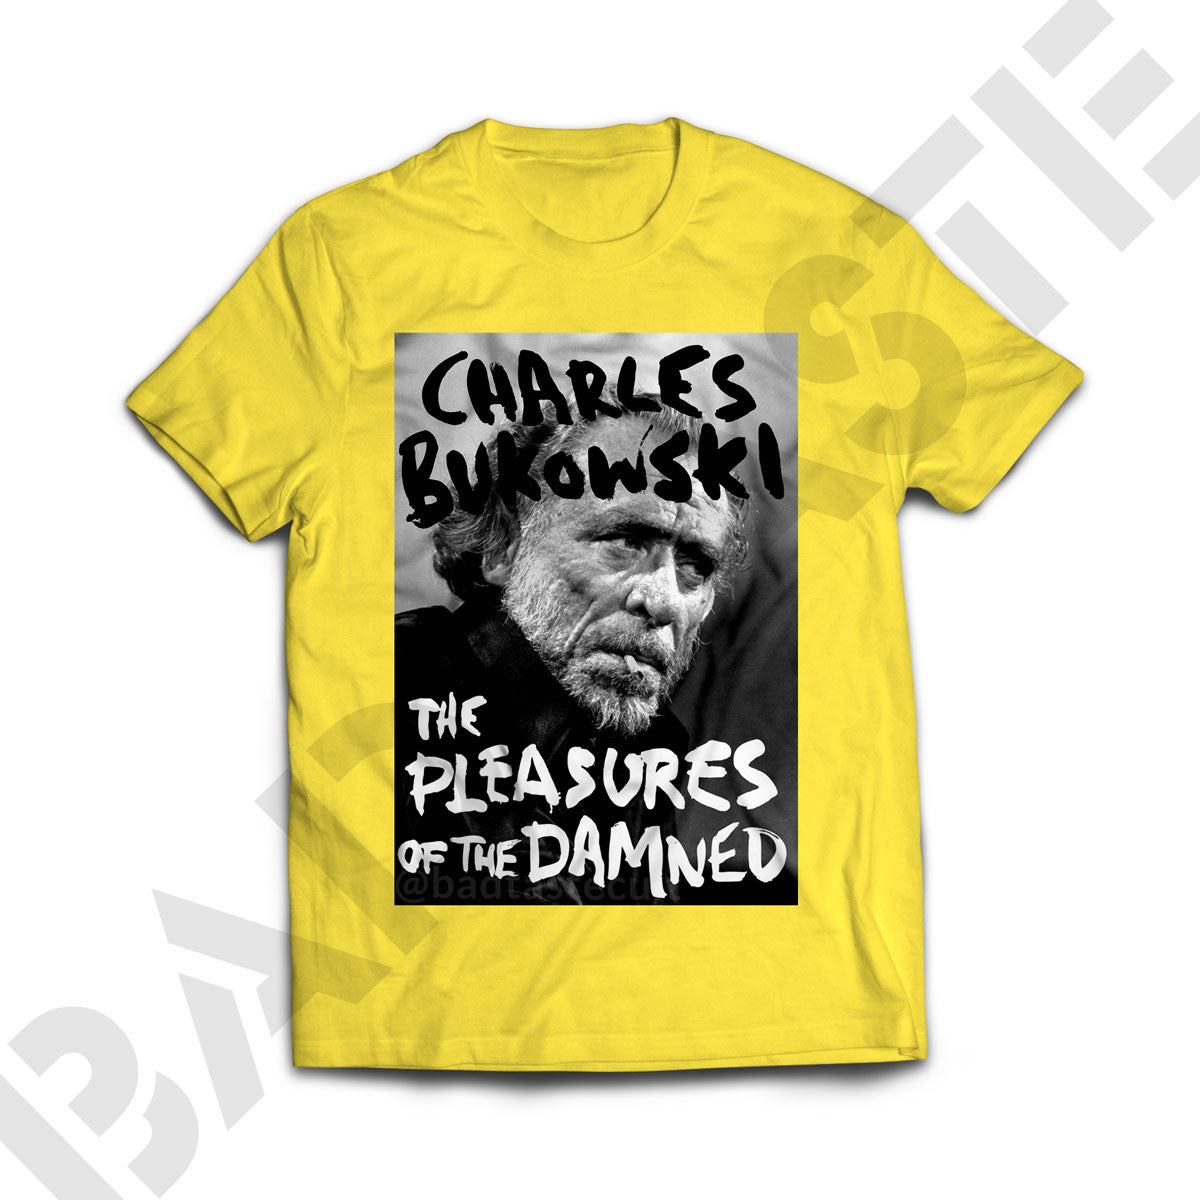 [POLO] Charles Bukowski 'The Pleasures of the Damned'